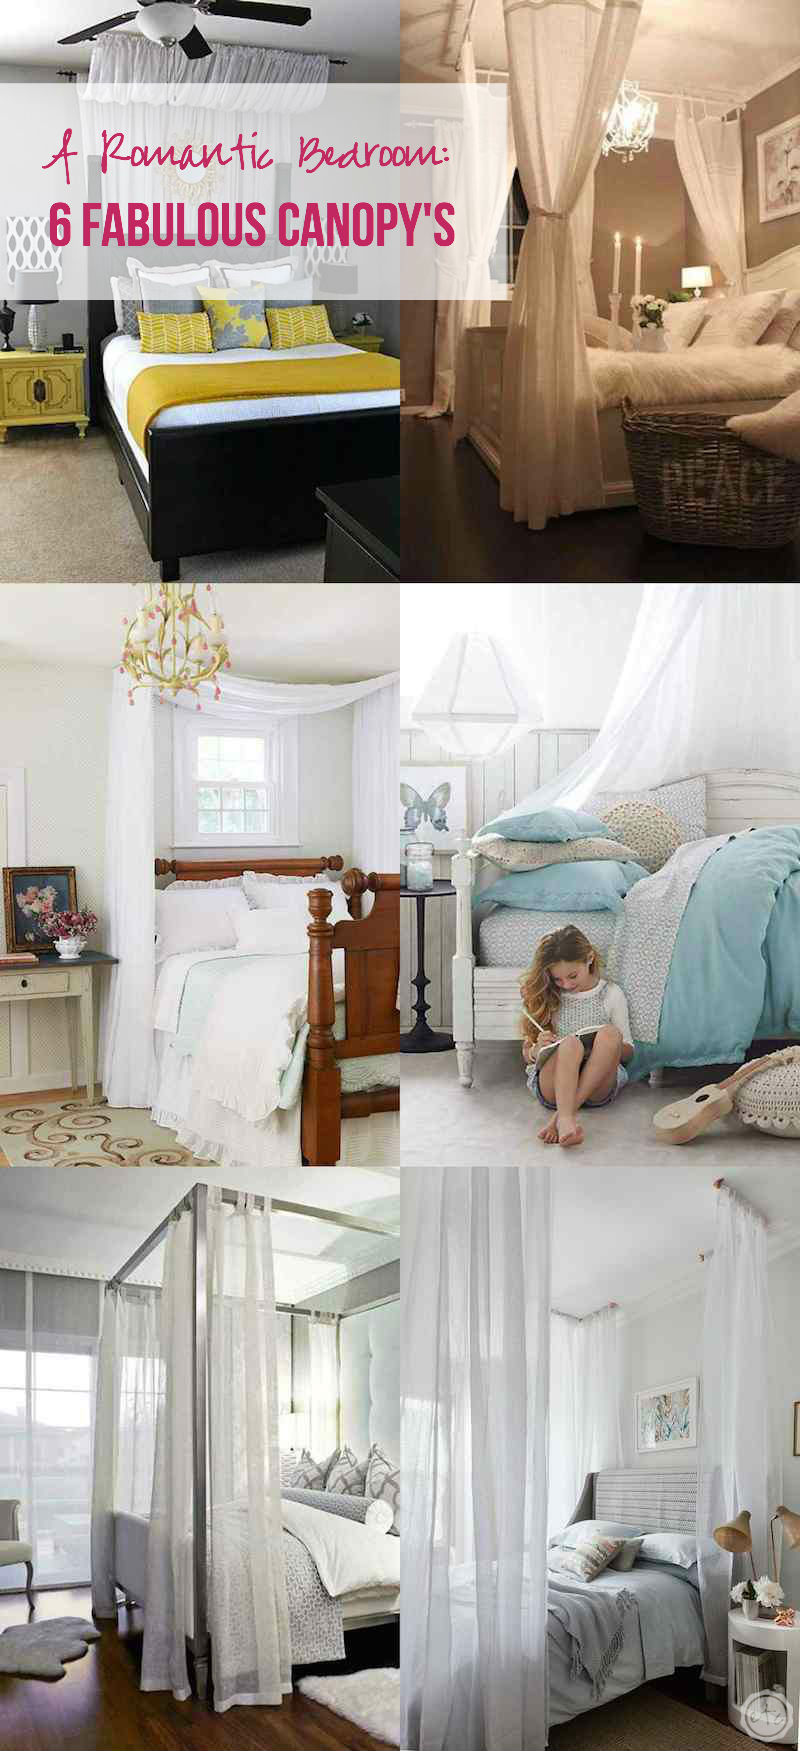 A Romantic Bedroom- 6 Fabulous Canopy's with Happily Ever After, Etc